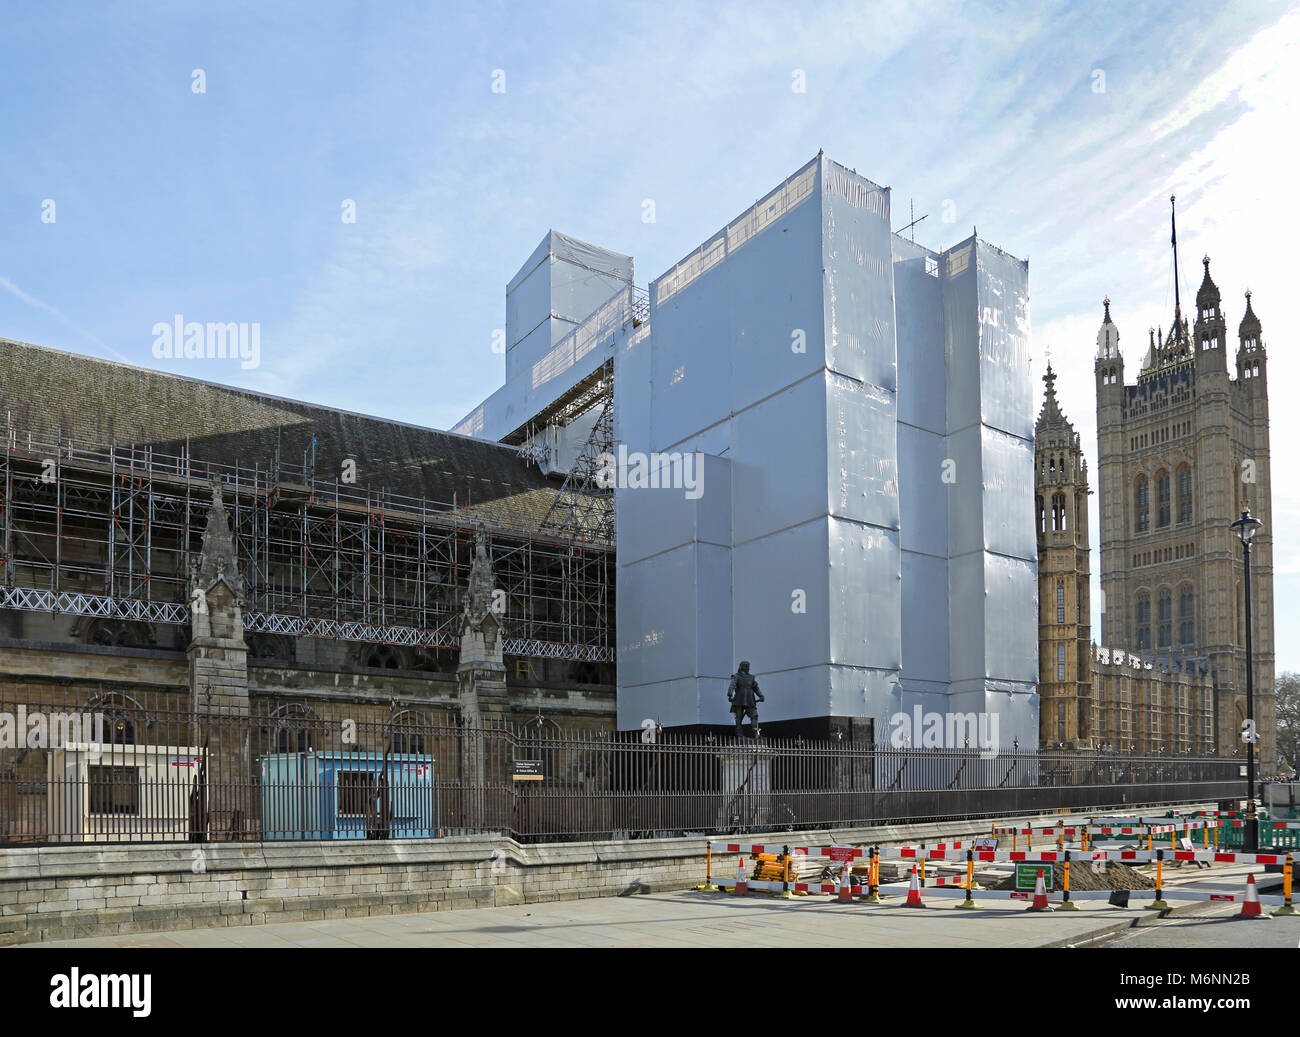 Scaffolding spans St Stephens Hall, part of the Palace of Westminster, and Houses of Parliament, London, UK. Part of the major renovation work 2018. Stock Photo